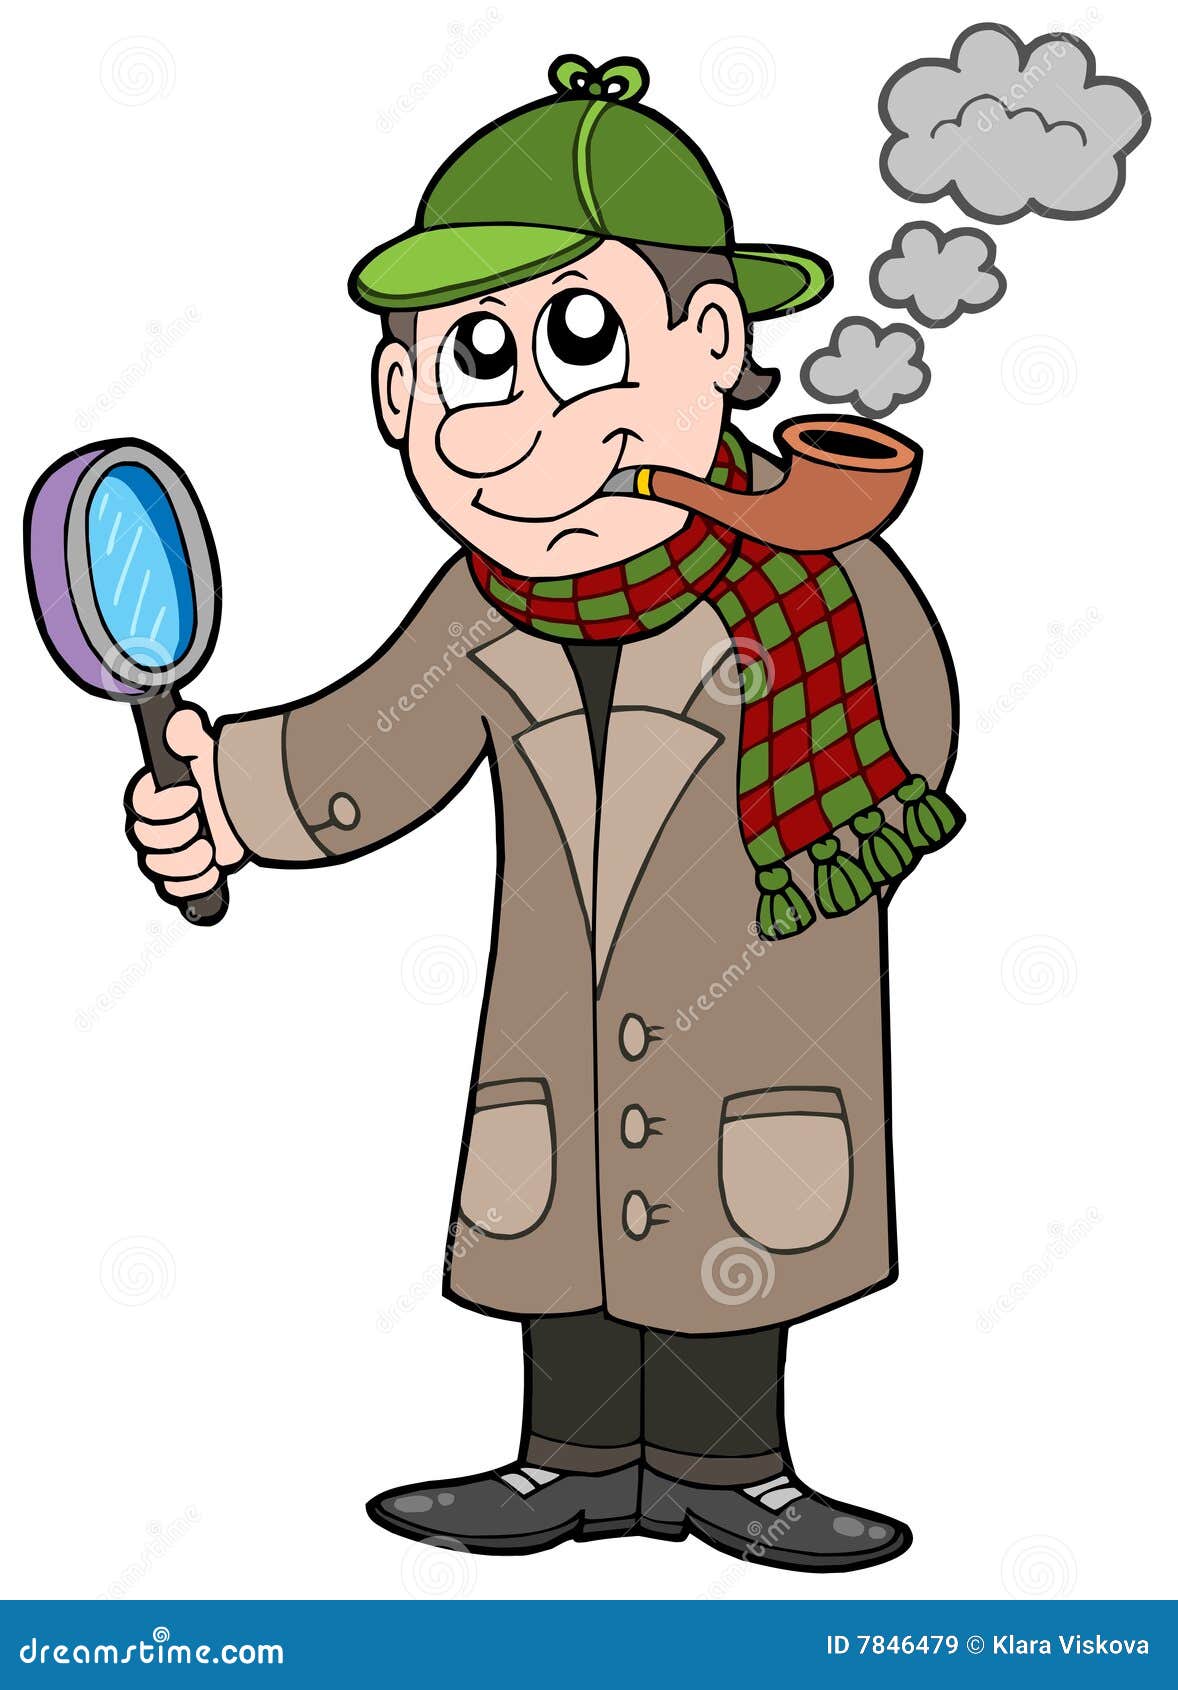 Cartoon Detective Royalty Free Stock Images Image 7846479